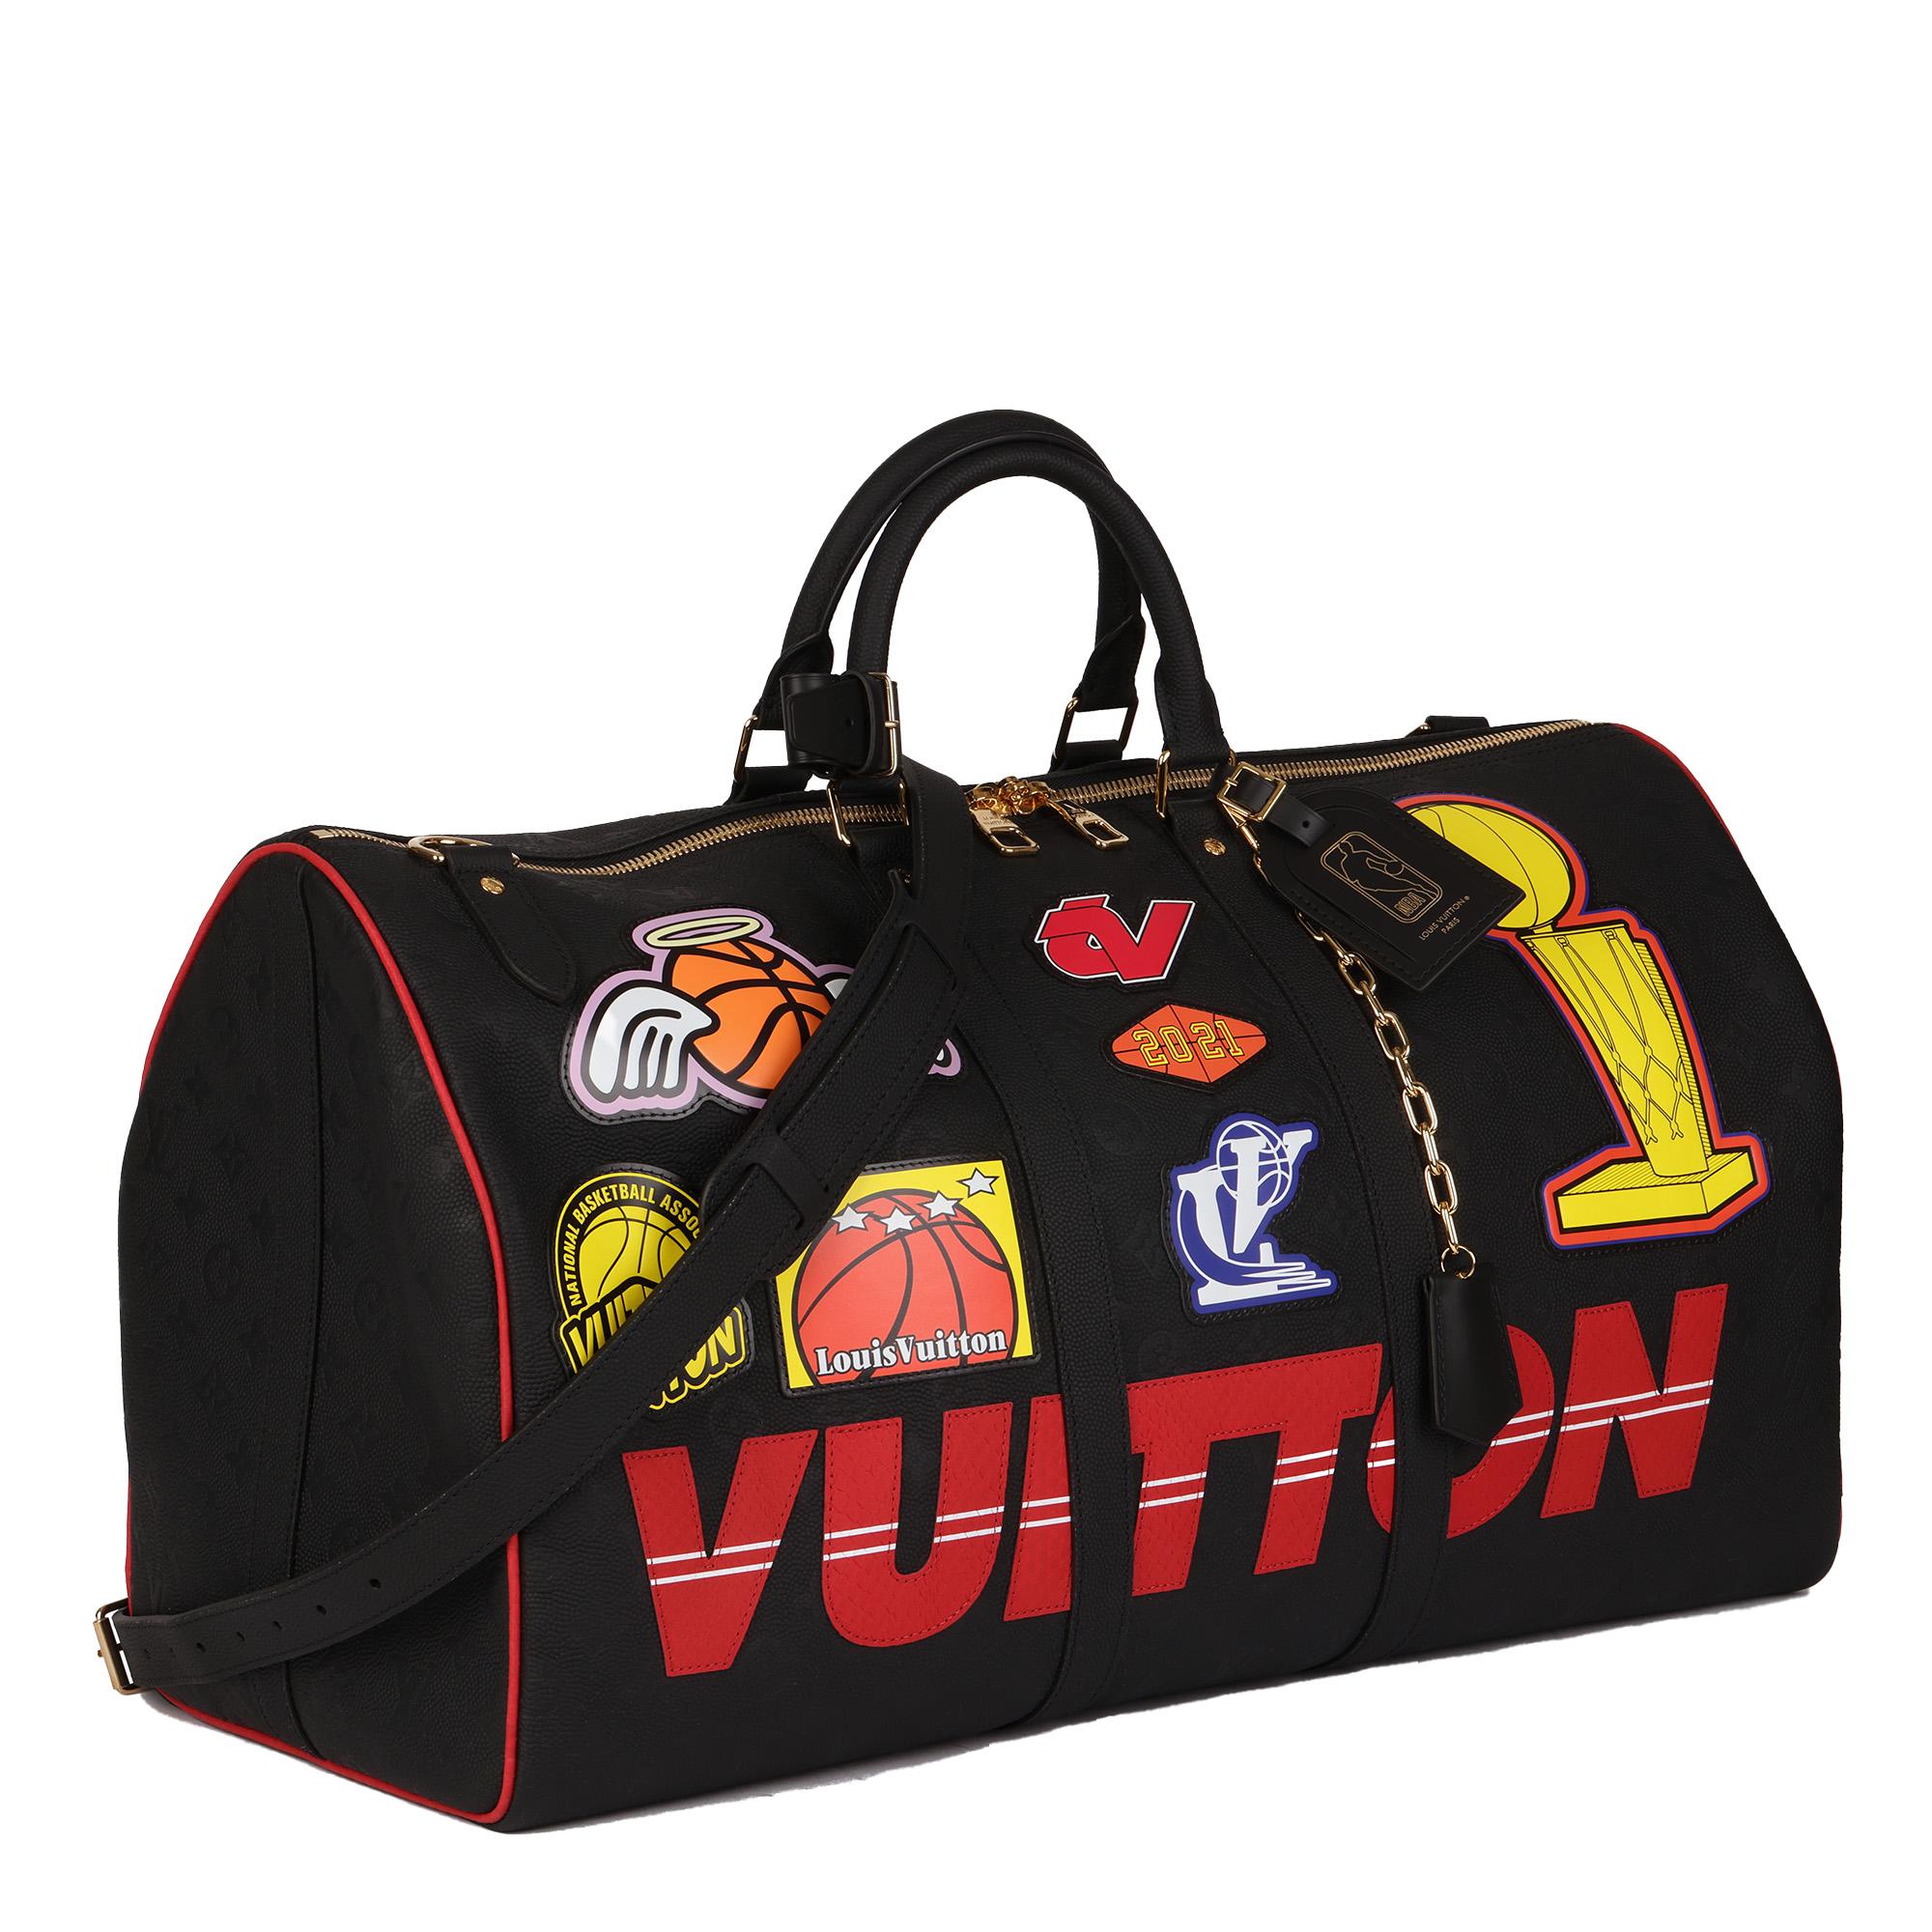 LOUIS VUITTON
Black Monogram Embossed Calfskin Leather & Red Python Leather NBA Prints & Patches Keepall 55 Bandouliere

Xupes Reference: HB4432
Serial Number: X
Age (Circa): 2021
Accompanied By: Louis Vuitton Dust Bag, Box, Shoulder Strap, Padlock,